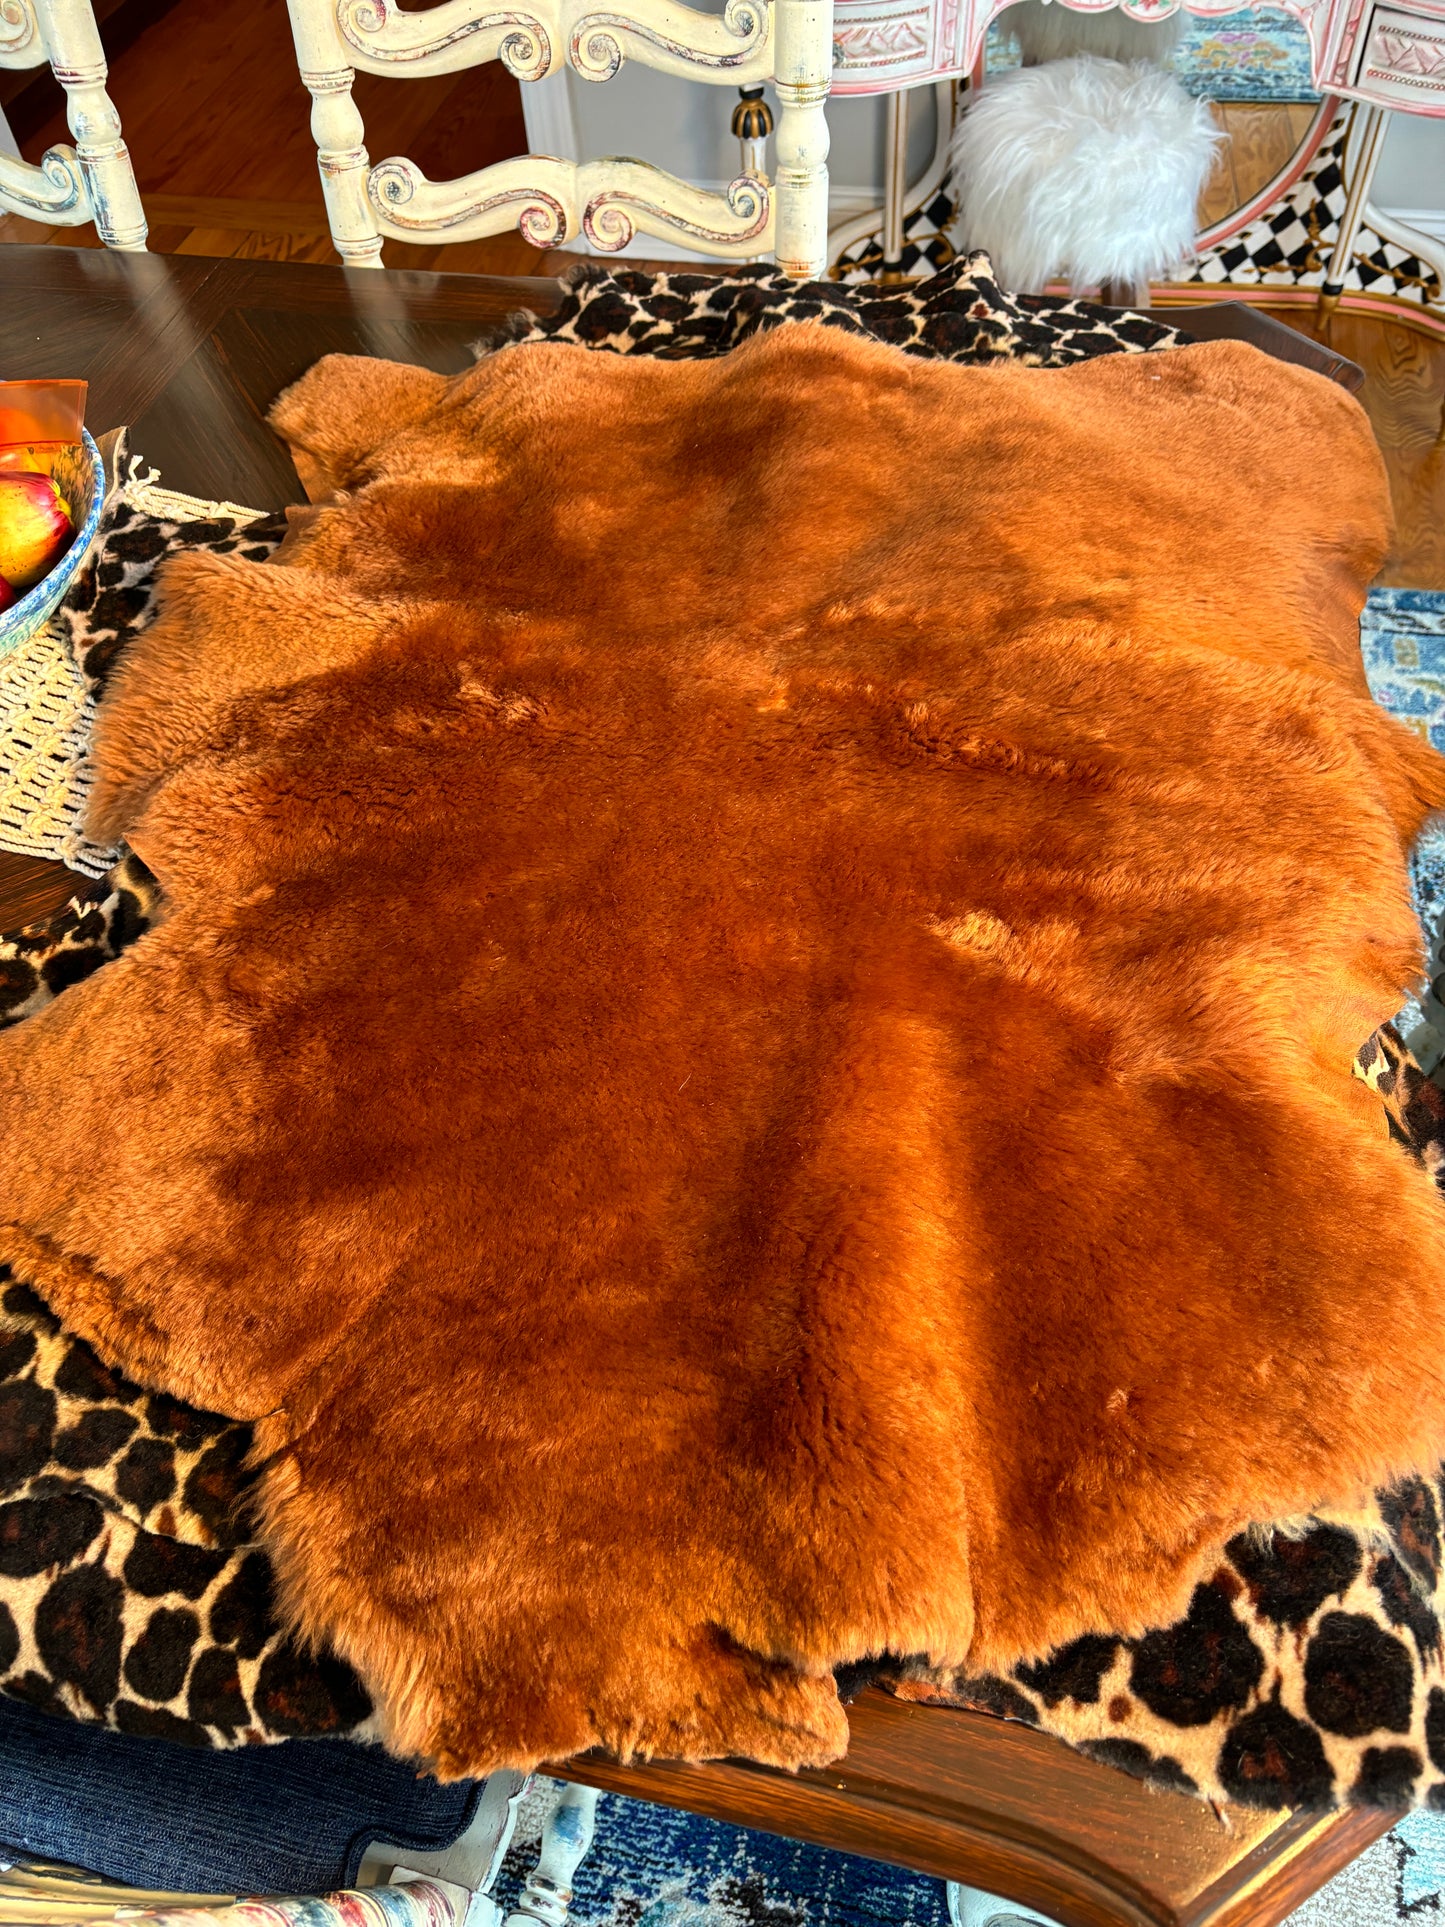 Listing 1 Shearling Merino Sheep Pelt, Sheepskin, Upholstery, Woolly, Leather Suede, Upcycling, DIY Projects, Choose Color, Genuine Hide Fur